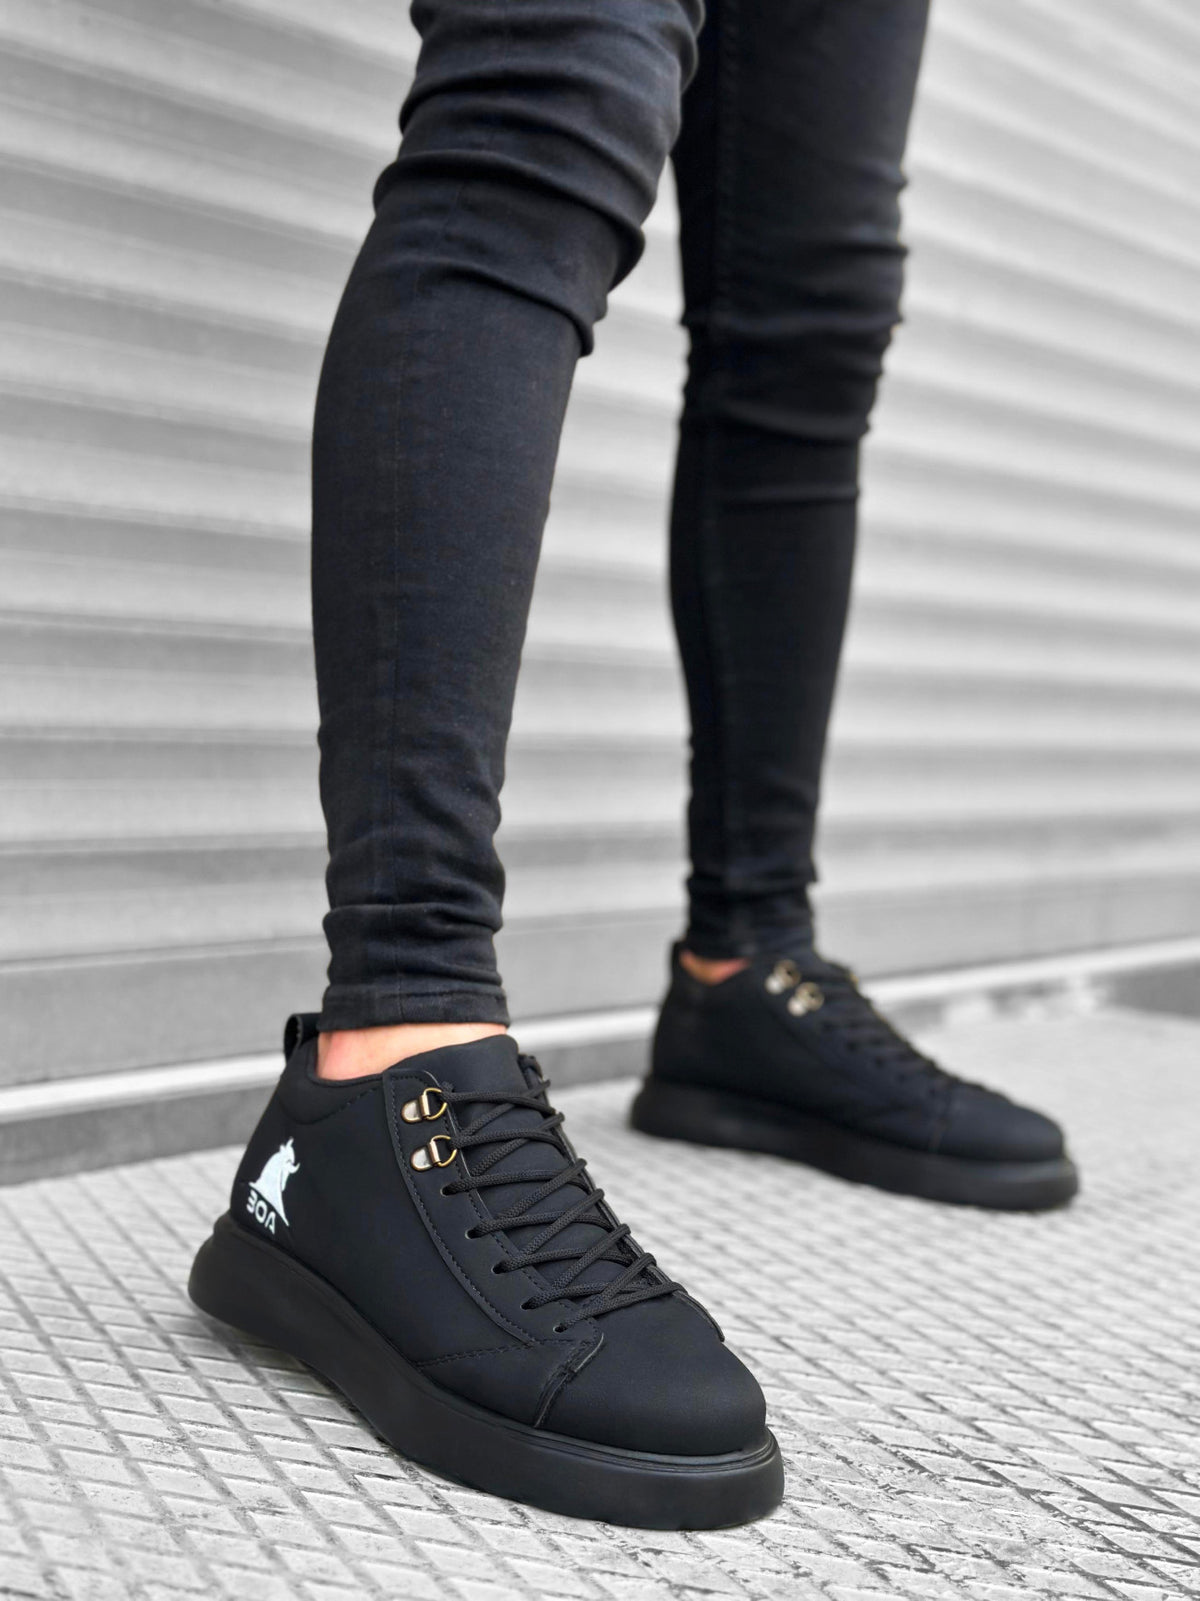 BA0220 Lace-up Men's High Black Sole Sports Sneakers Shoes - STREETMODE™